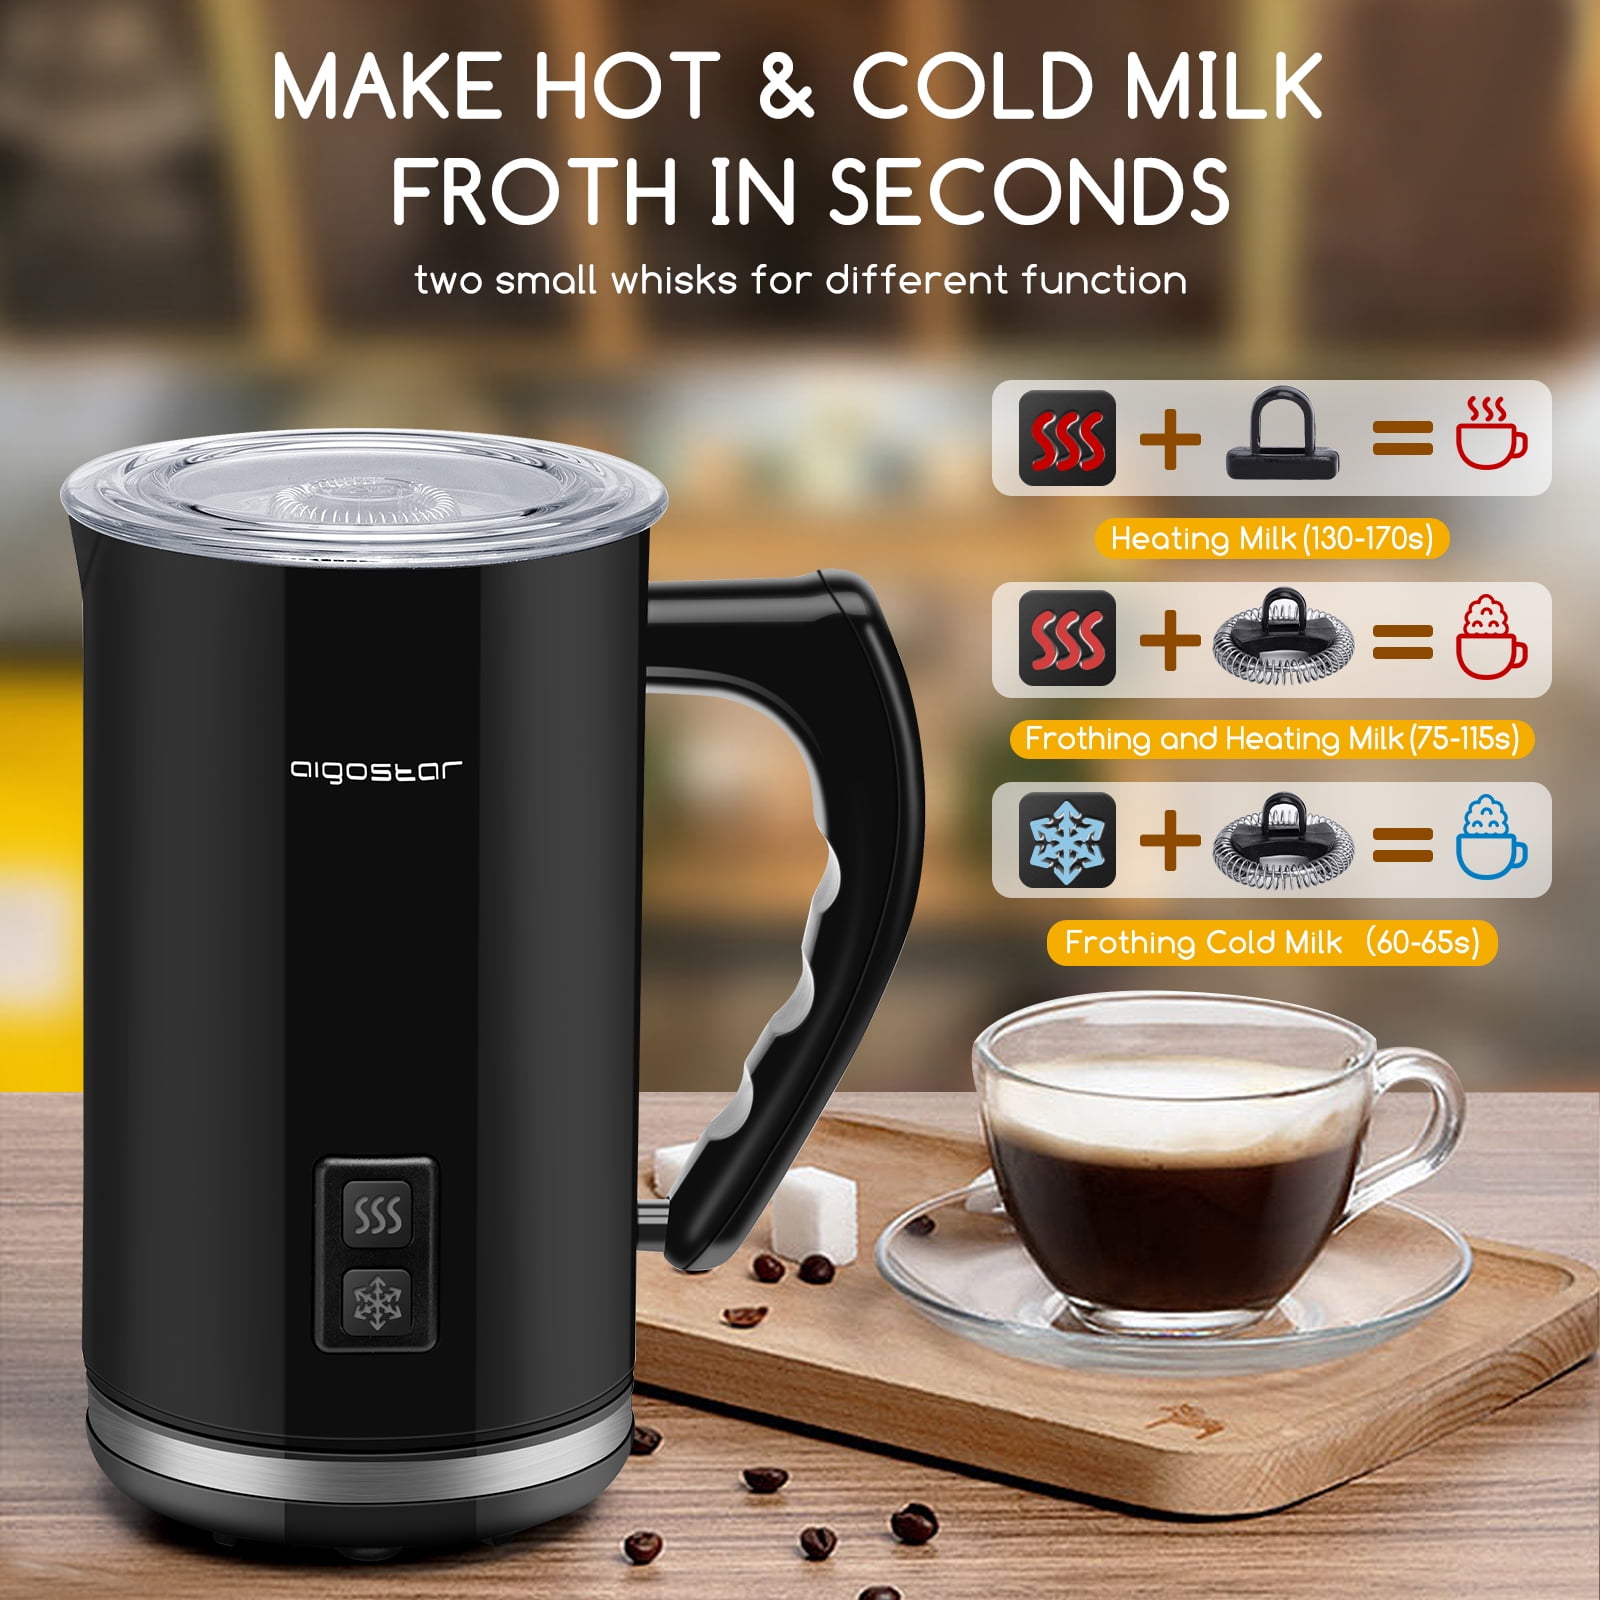 AllToU Milk Frother and Steamer, 4-in-1 Electric Milk Steamer, 350ml  Automatic Hot and Cold Foam Maker and Milk Warmer for Coffee Latte,  Cappuccinos